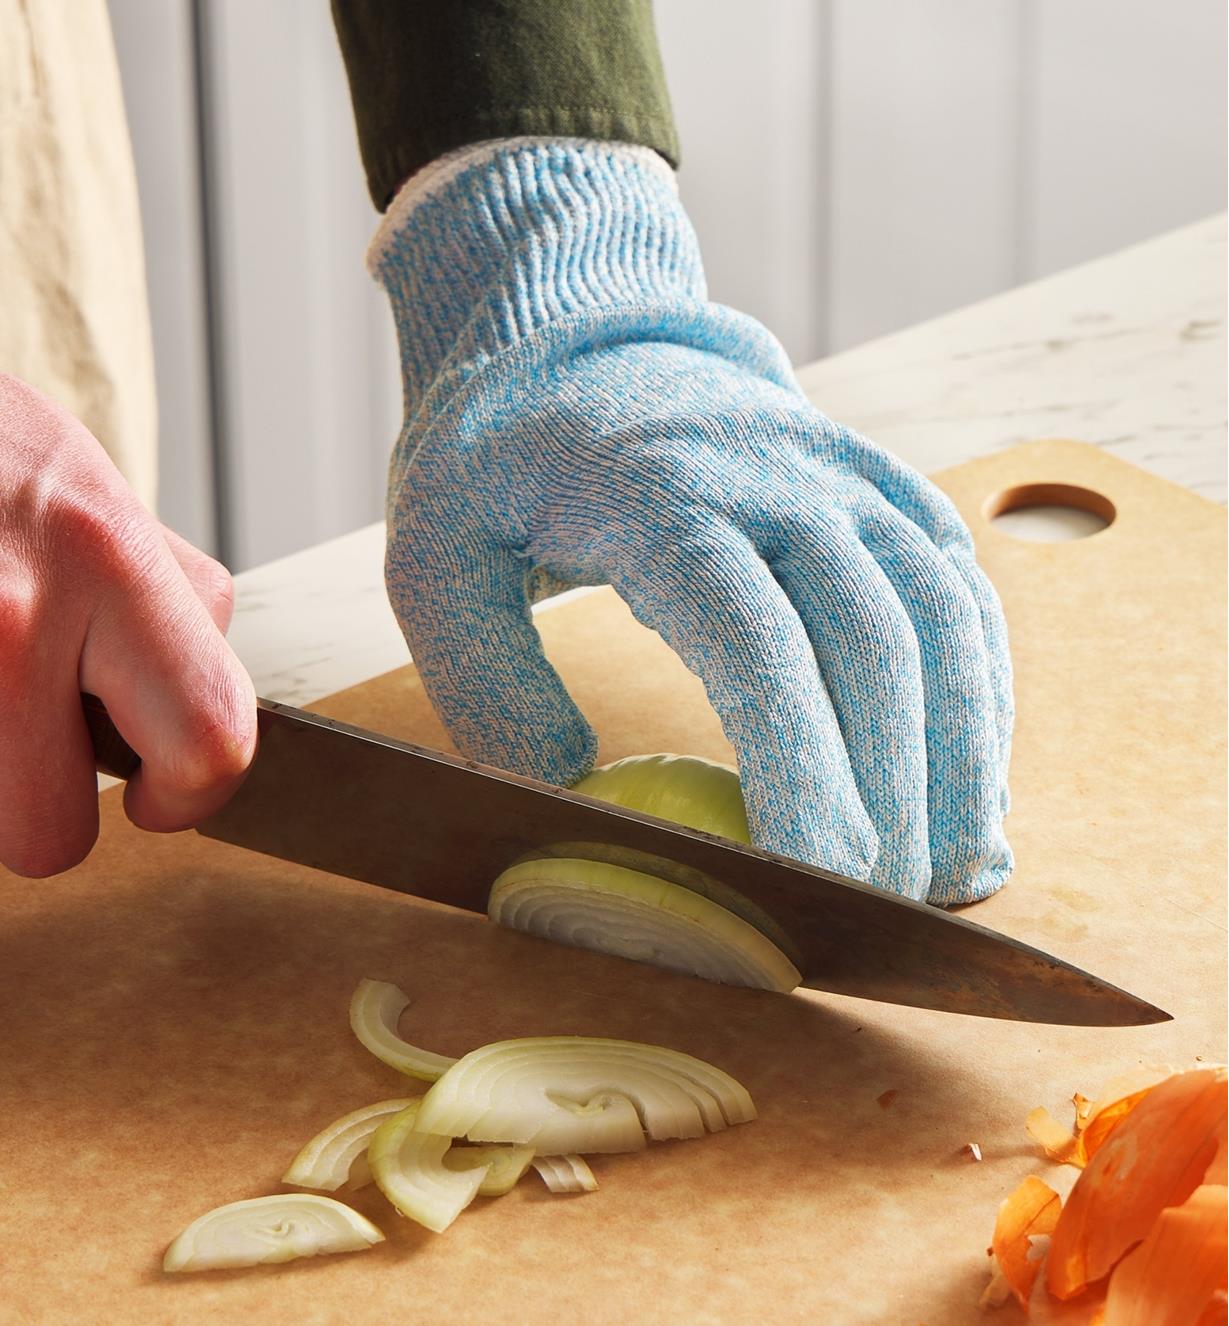 A gloved hand holds an onion in place on a cutting board as it is being sliced